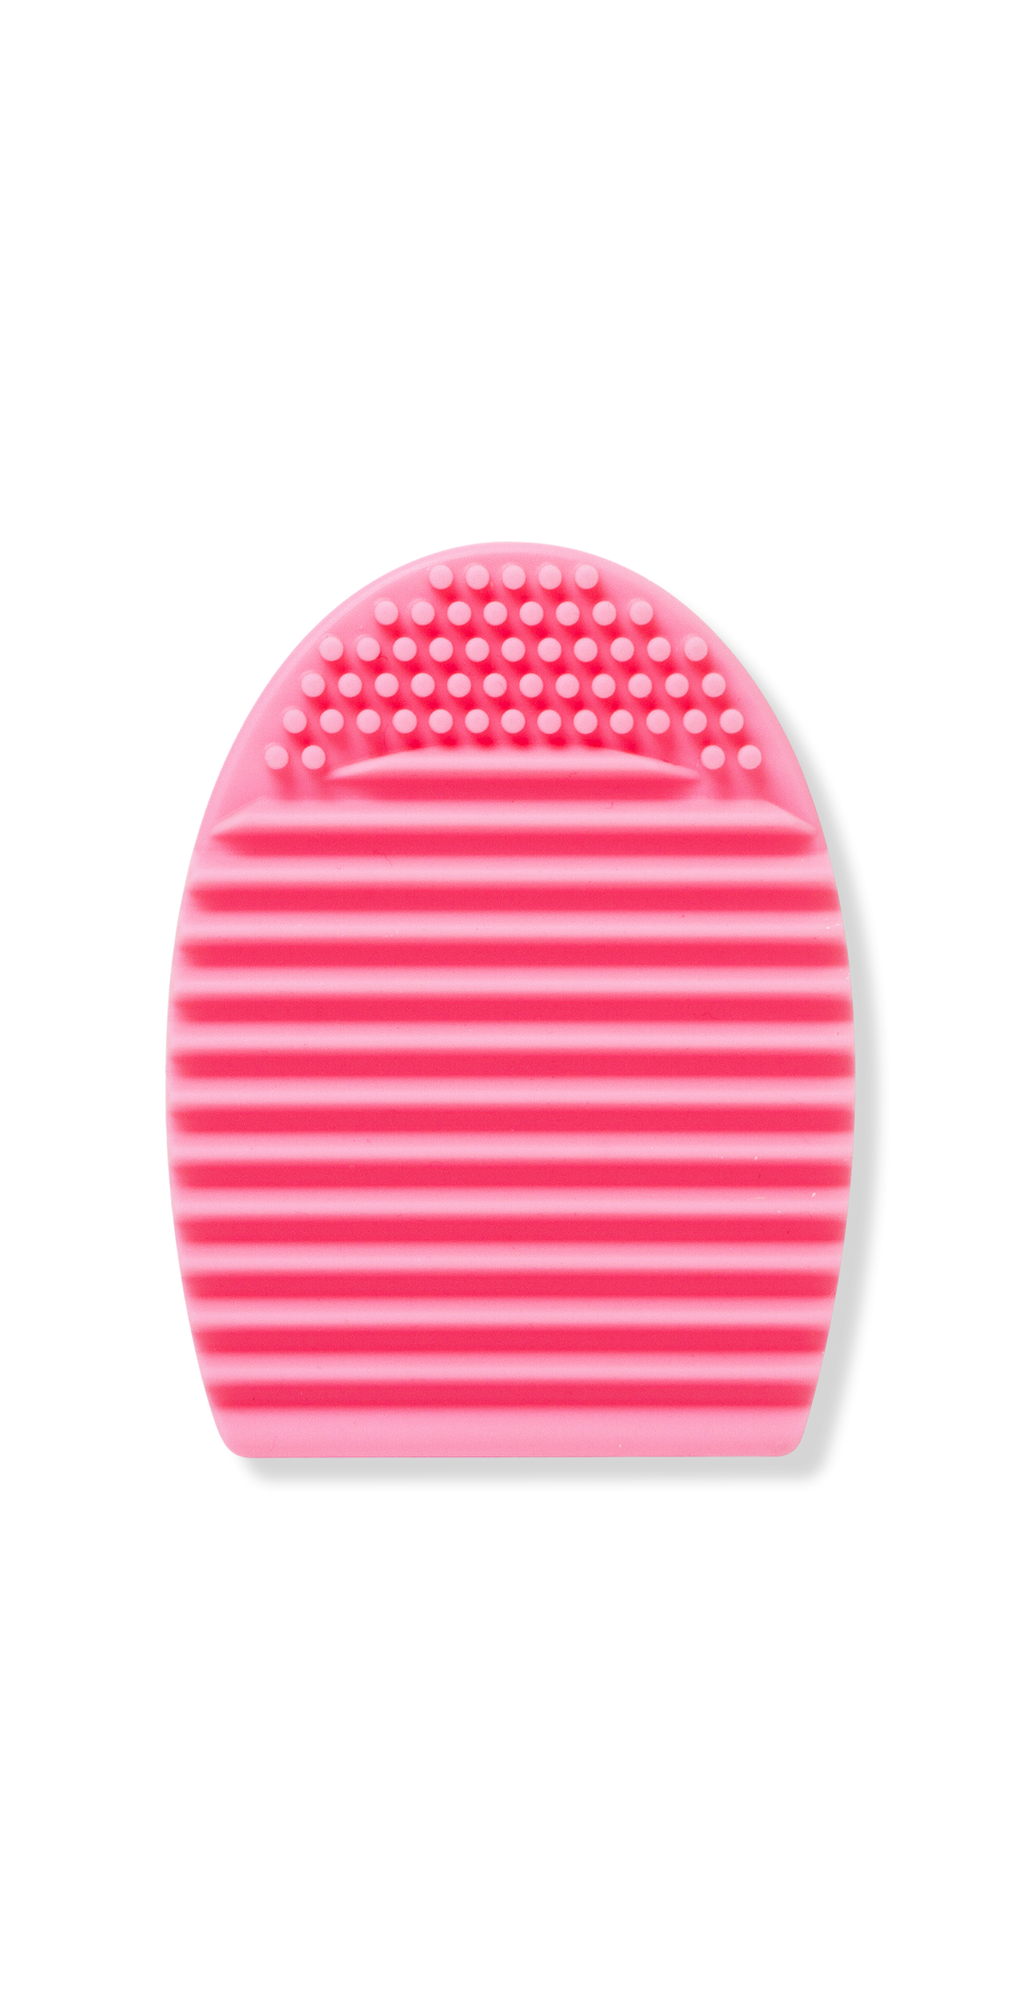 J.Cat Beauty, Silicone Brush Cleaner, Pink